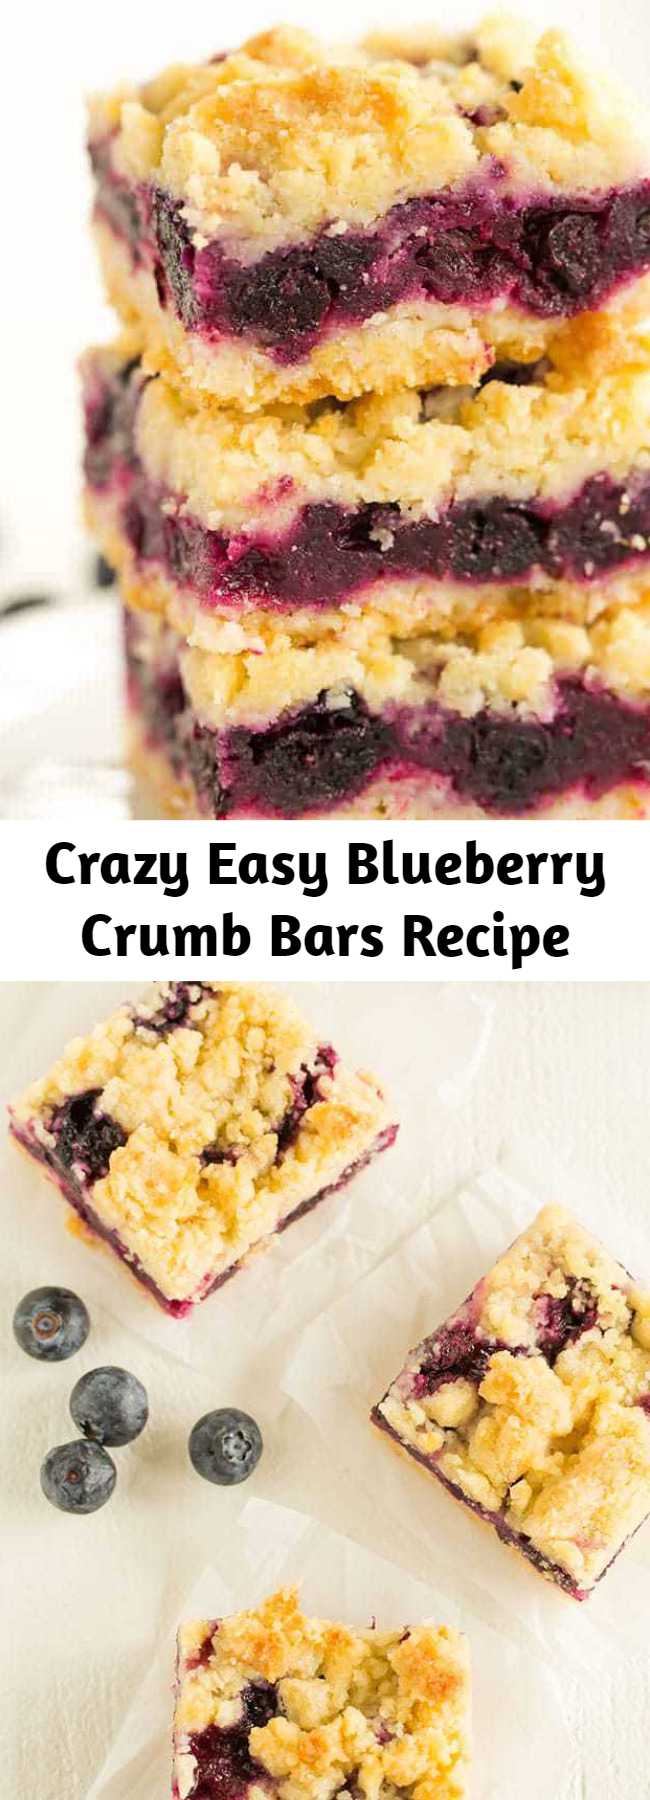 These blueberry crumb bars are crazy easy to make and could, dare I say, rival your favorite blueberry pie recipe. You can pick them up and eat them on the go, which makes them a perfect dessert for picnics and summer parties! #blueberrycrumbbars #crumbbars #blueberry #summerdessert #dessert